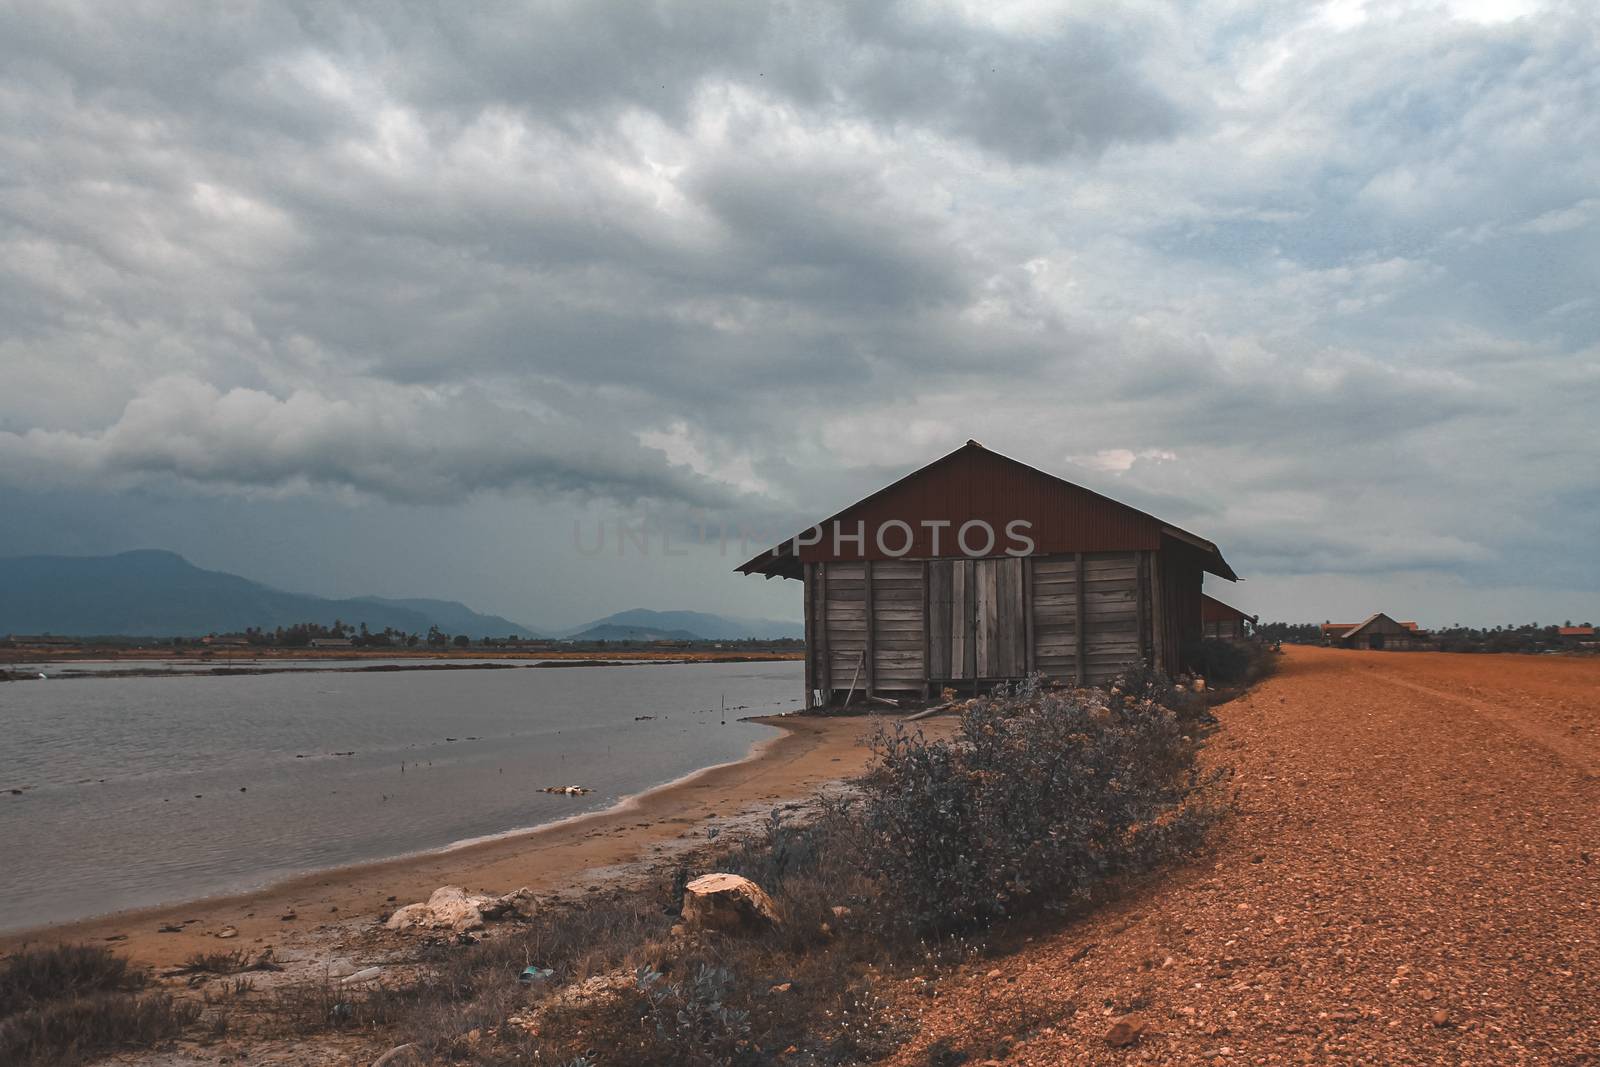 Cinematic photo of an abandoned salt storage house in the famous salt fields of Kampot, shows the effect of covid-19 lock downs on the local industry, economy and livelihood of the Cambodian people